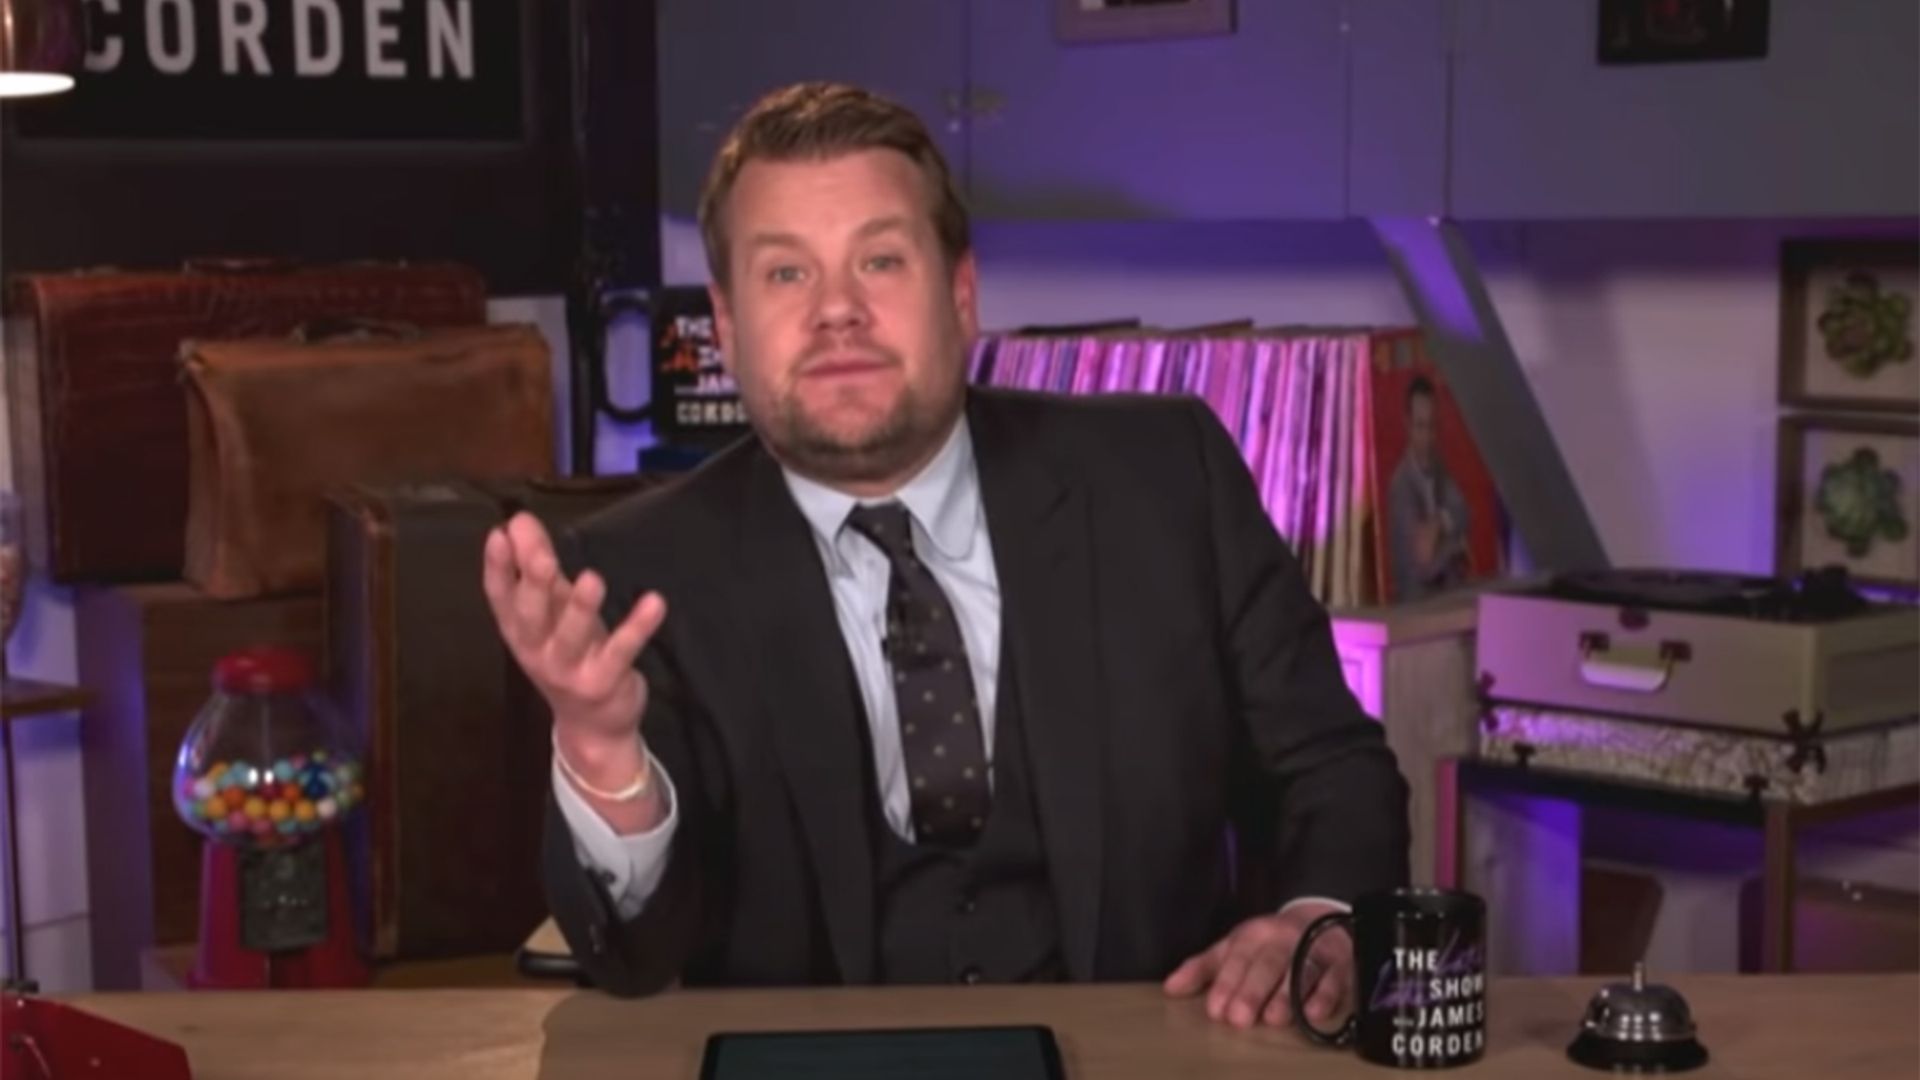 James Corden visibly emotional as he talks 'sad' day for America